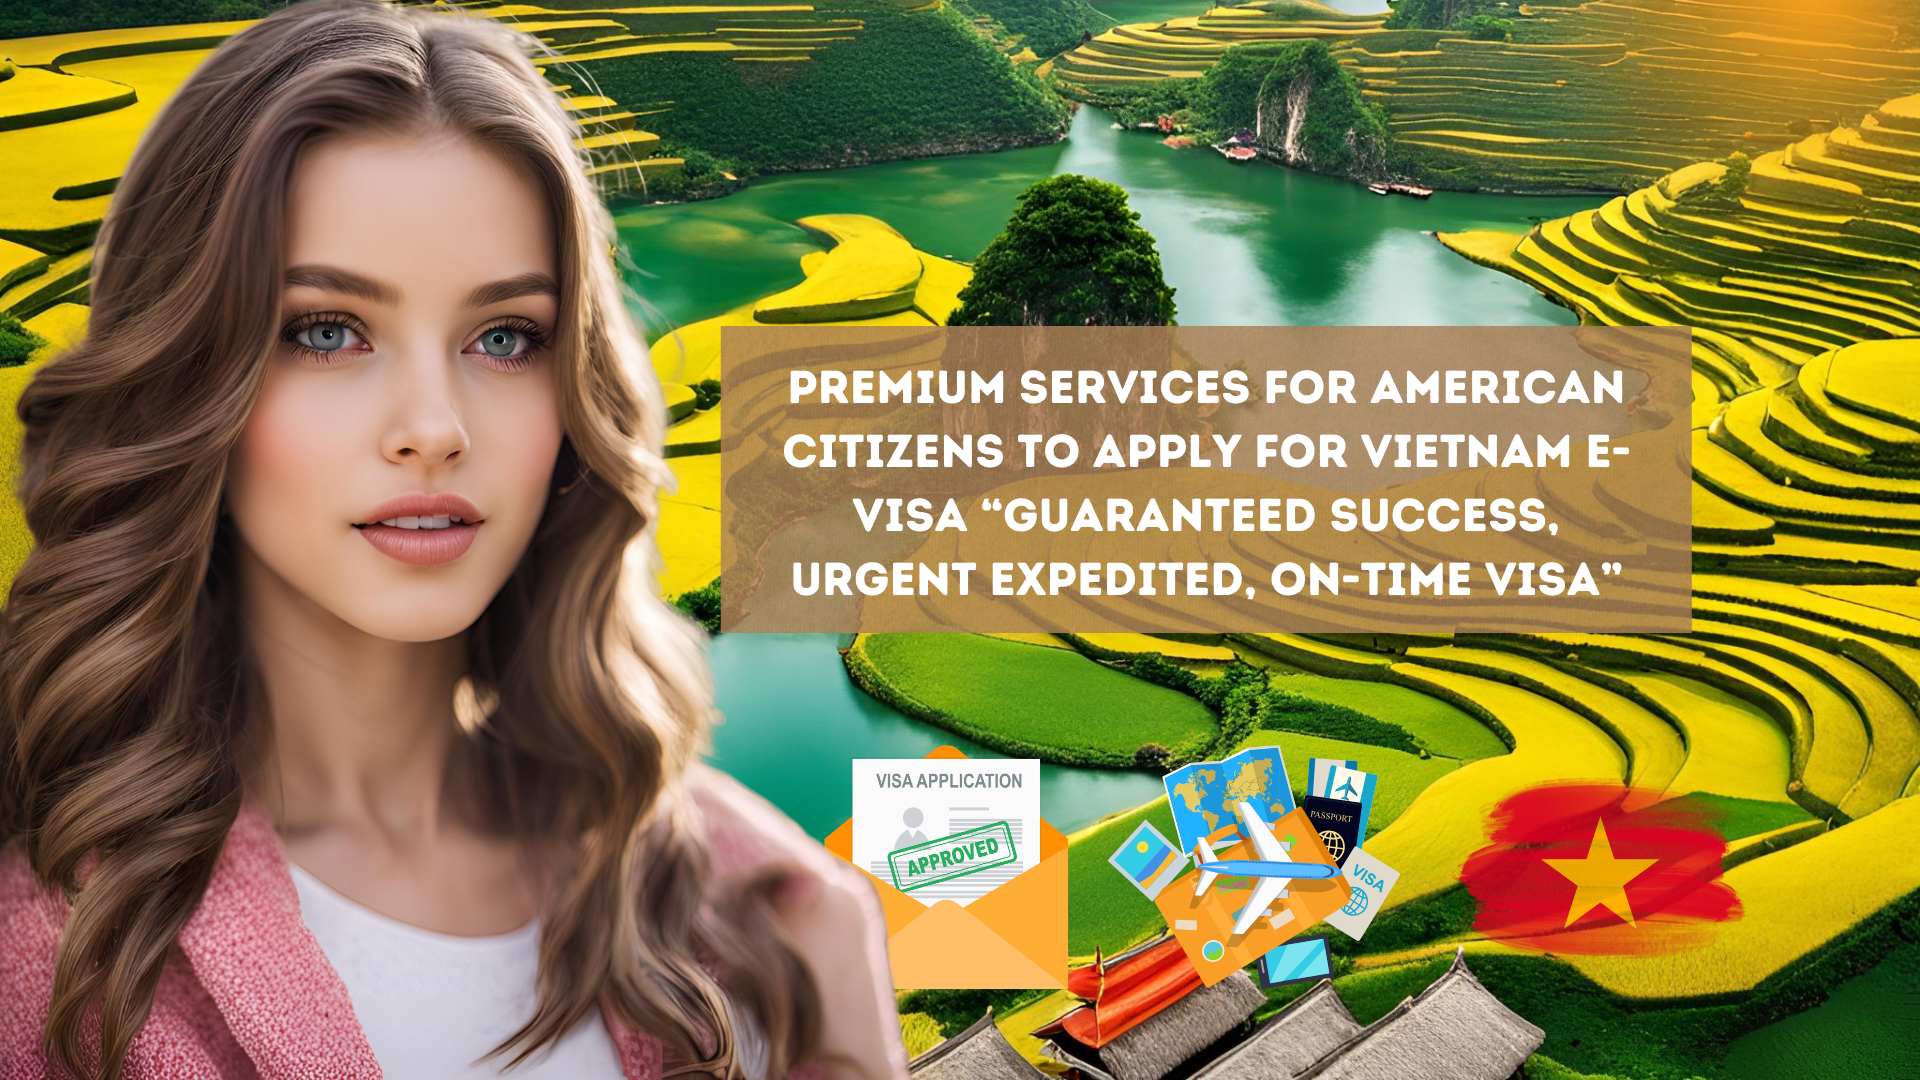 Premium Services for American Citizens to apply for Vietnam e-visa “Guaranteed success, urgent expedited, on-time visa”